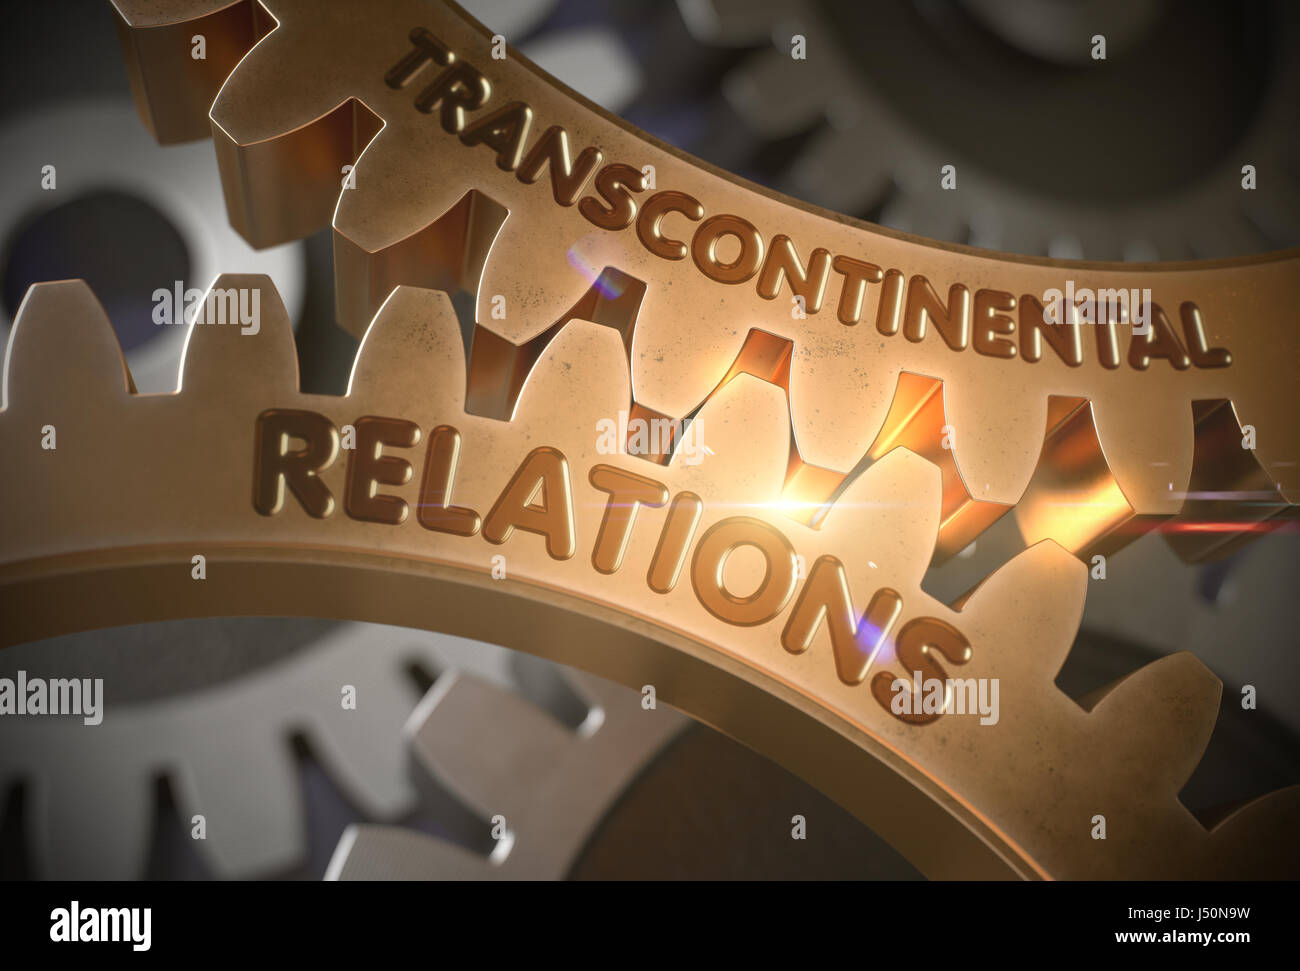 Transcontinental Relations. 3D. Stock Photo